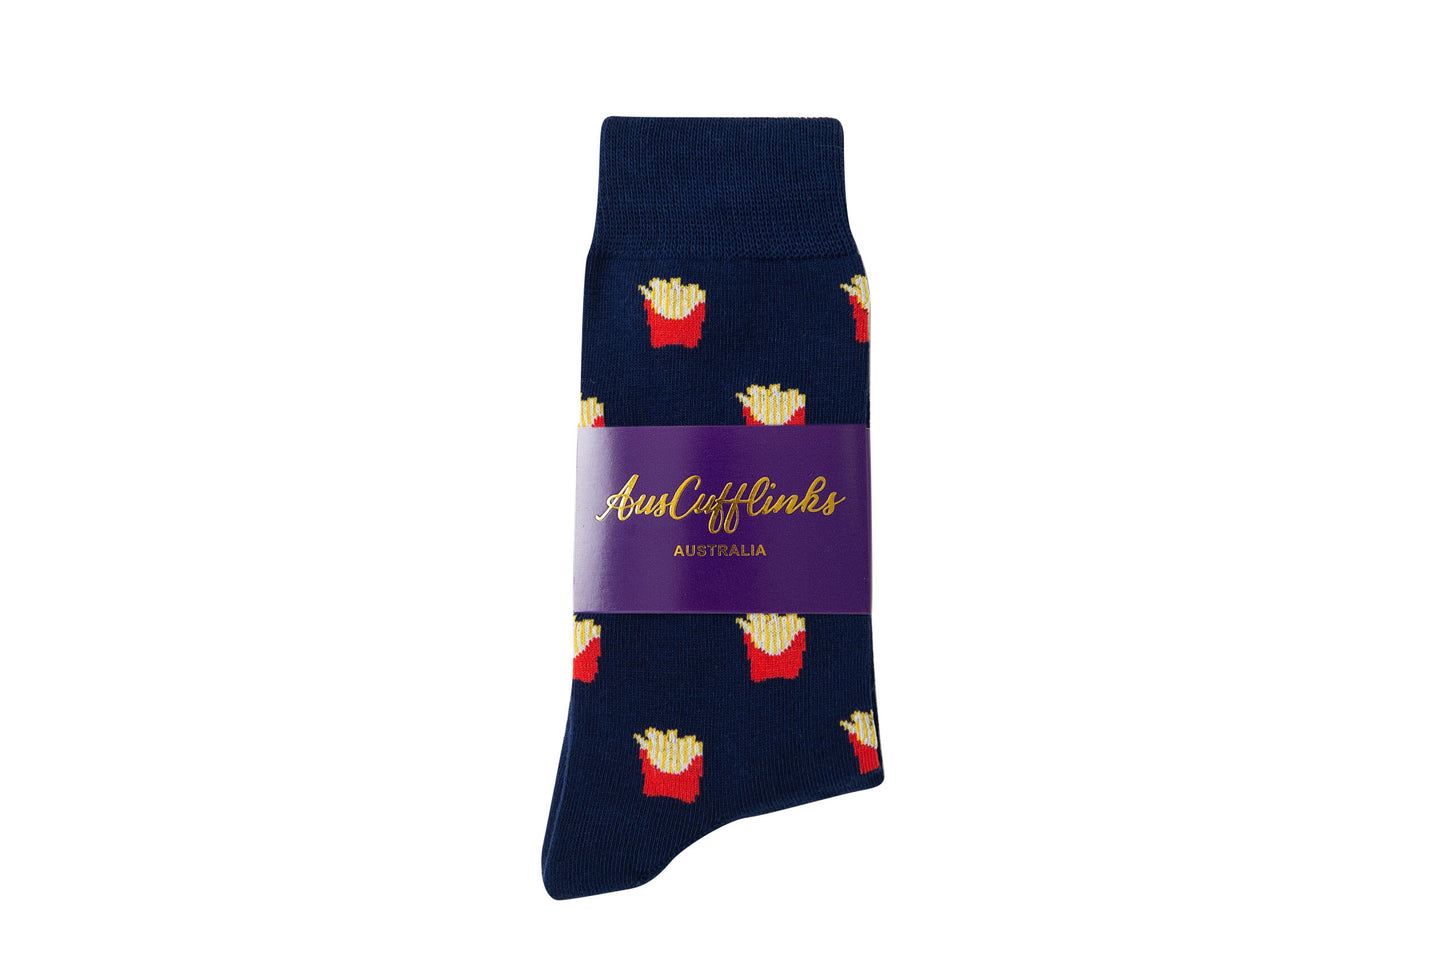 A pair of Fries Socks with french fries on them.